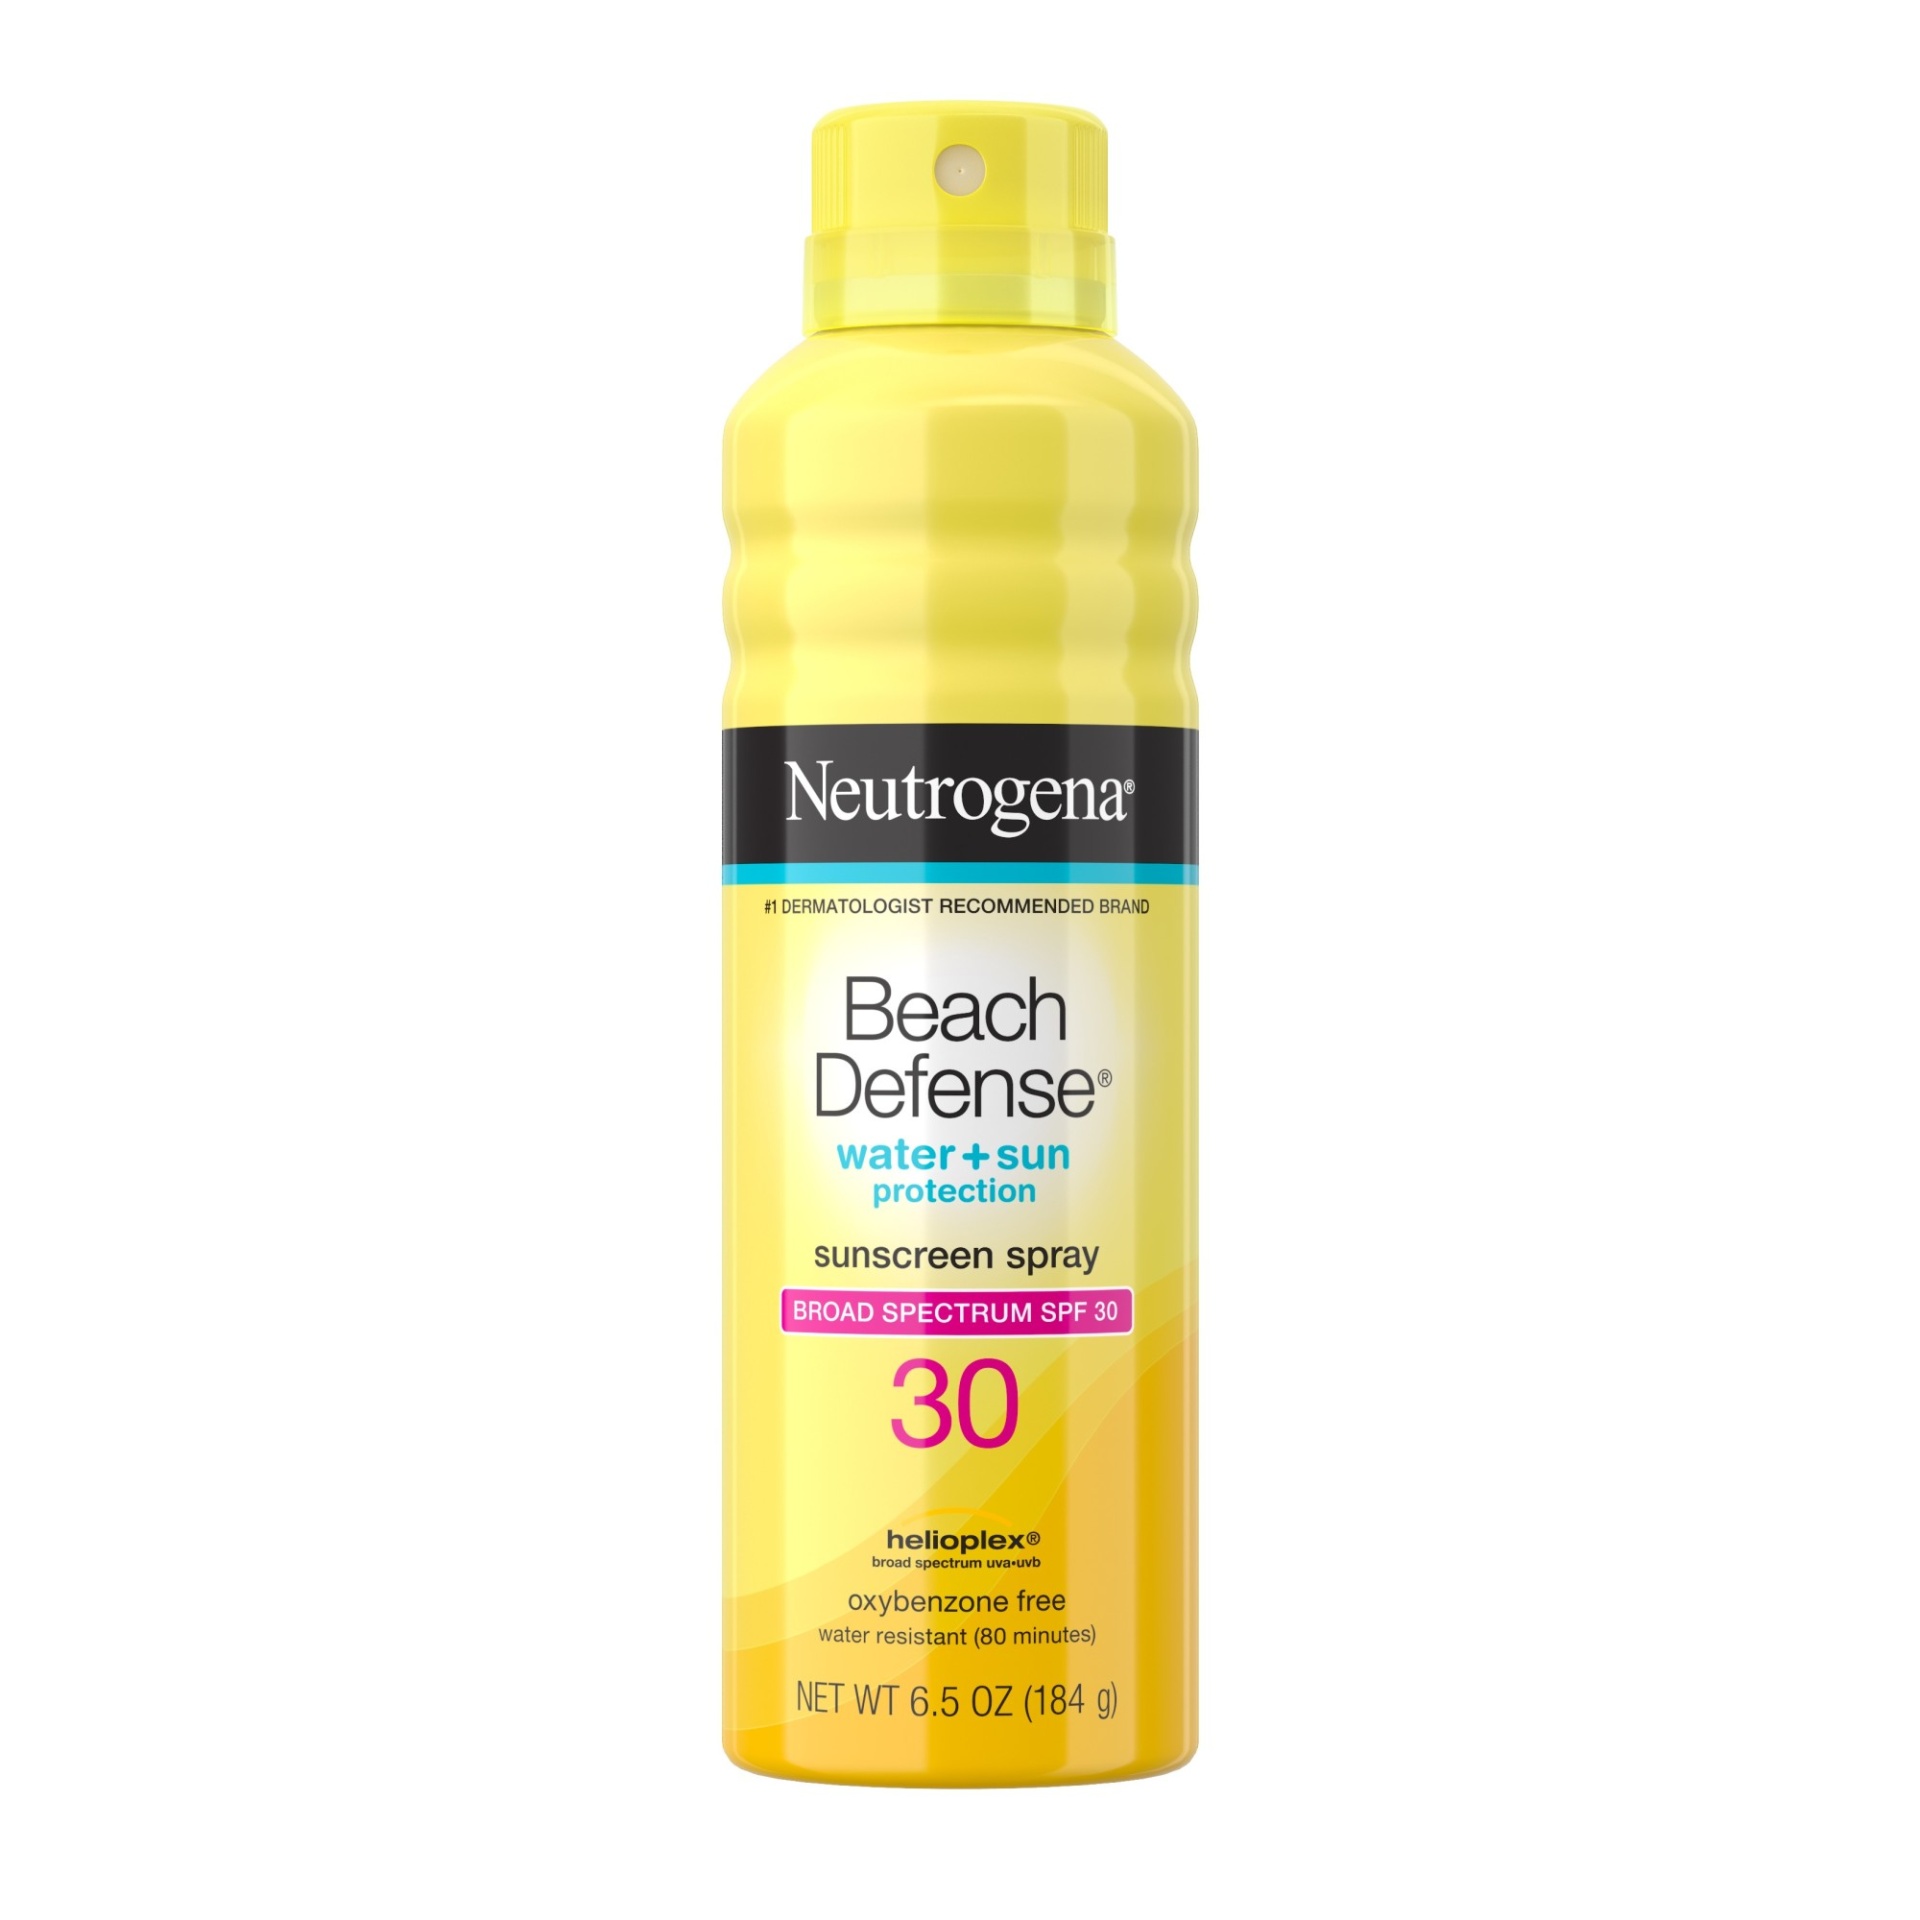 slide 1 of 6, Neutrogena Beach Defense Sunscreen Spray SPF 30 Water-Resistant Sunscreen Body Spray with Broad Spectrum SPF 30, PABA-Free, Oxybenzone-Free & Fast-Drying, Superior Sun Protection, 6.5 oz